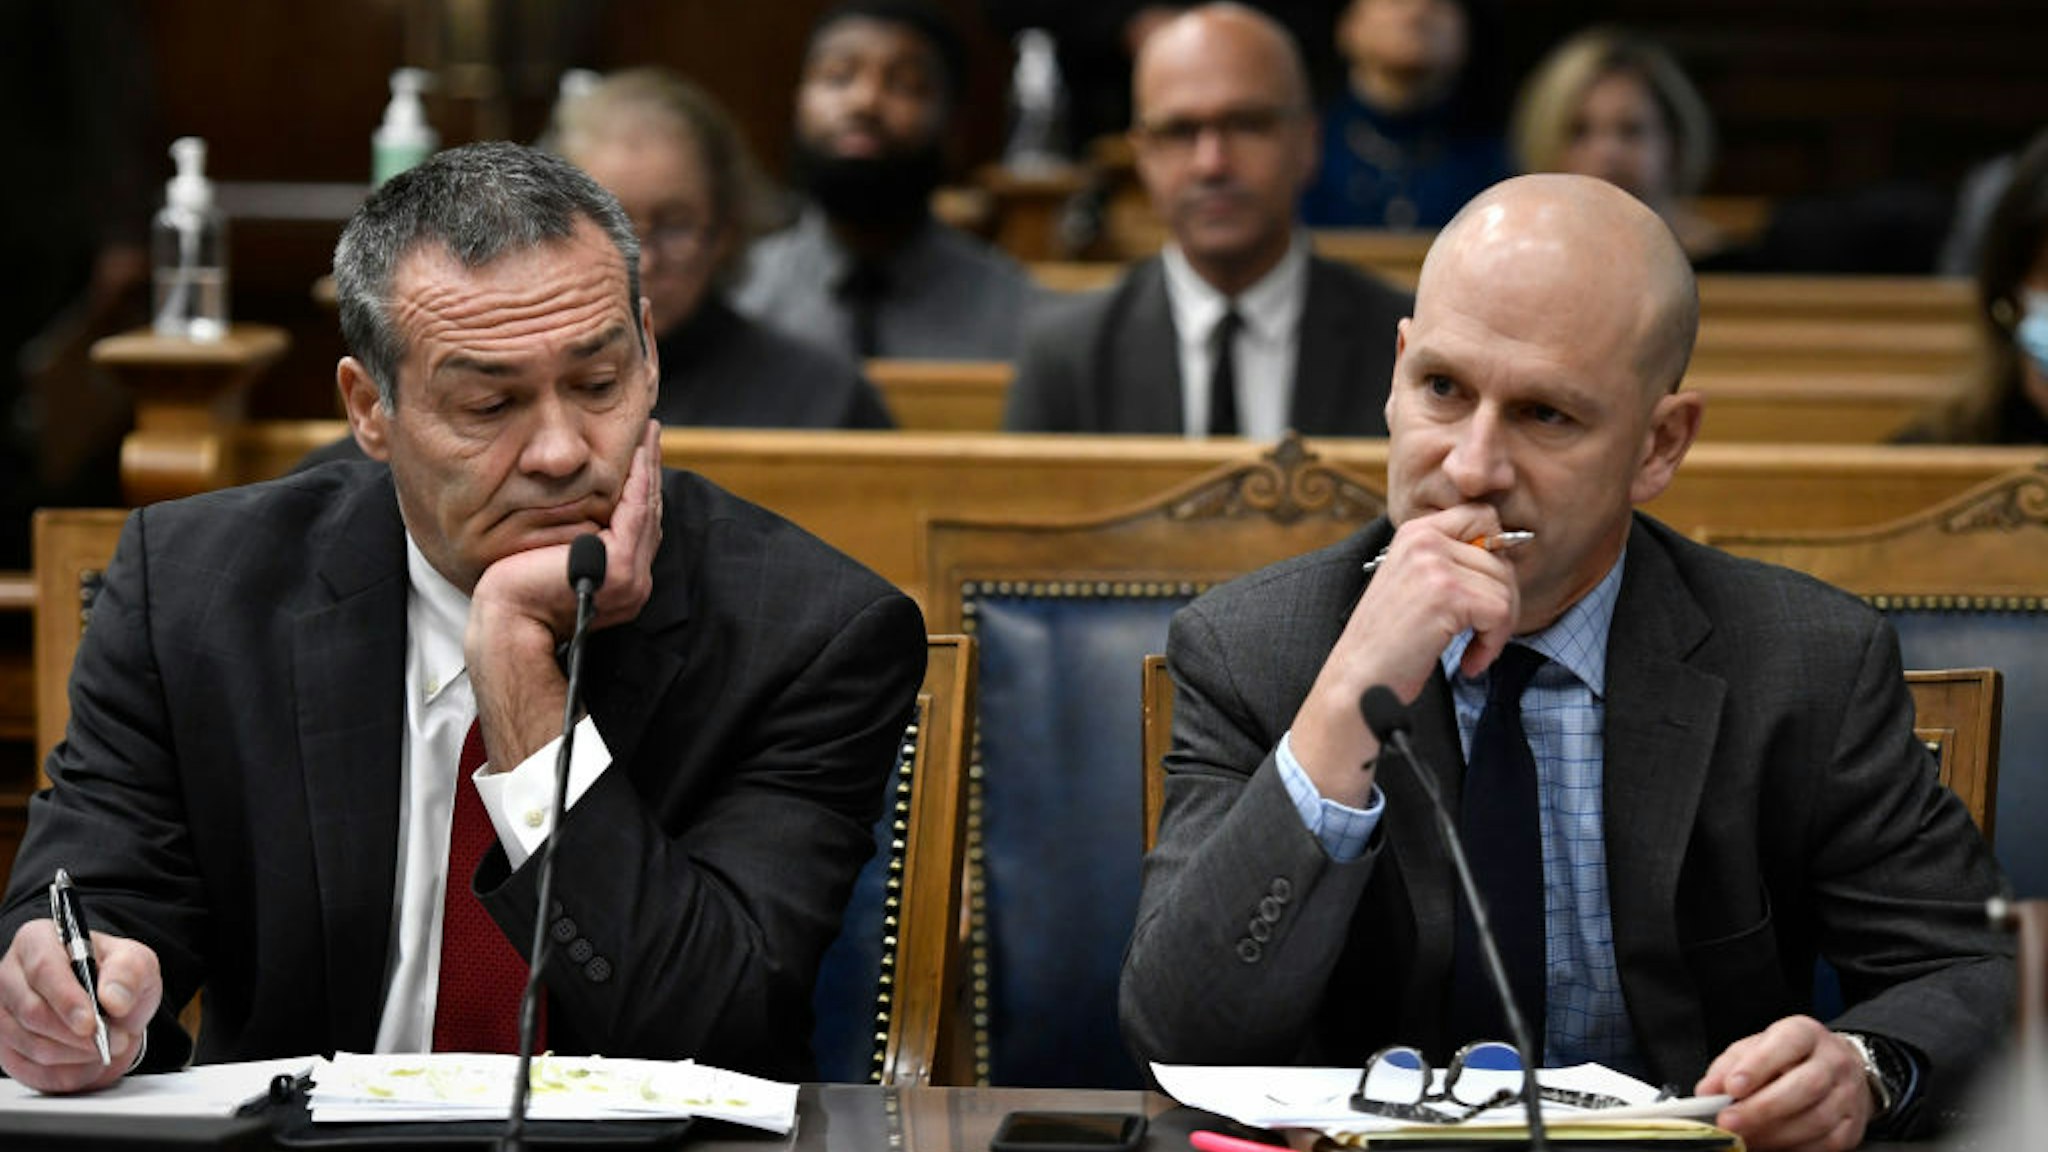 Mark Richards (L) and Corey Chirafisi, Kyle Rittenhouse's attorneys, listen as Judge Bruce Schroeder talks during his trial at the Kenosha County Courthouse on November 16, 2021 in Kenosha, Wisconsin.